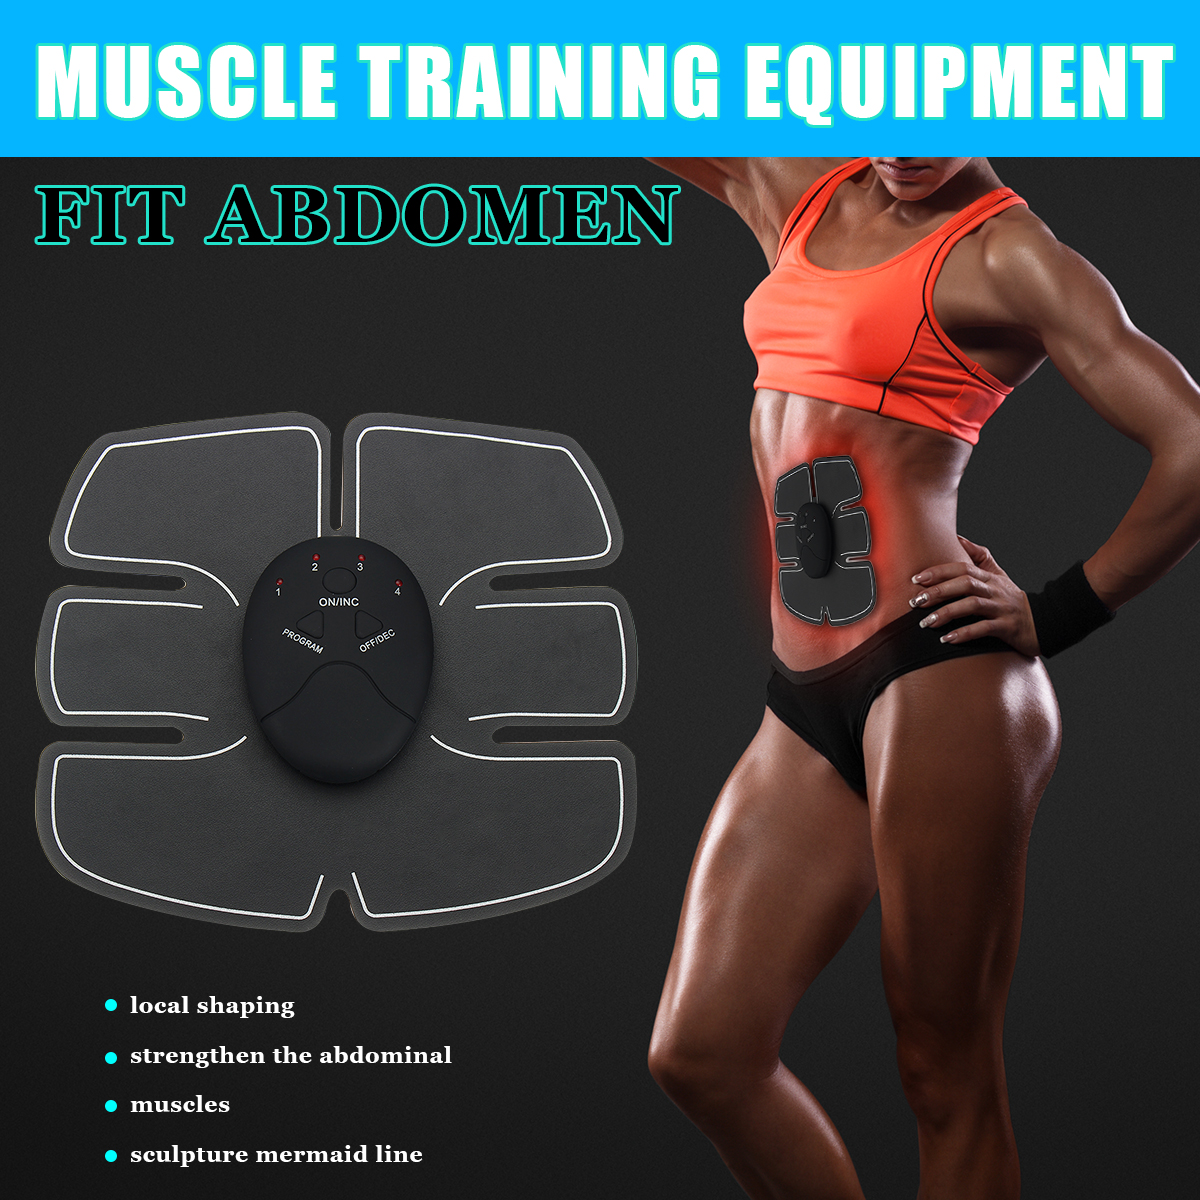 Abdomen-Muscle-Stimulator-EMS-Training-Electrical-Body-Shape-Home-Trainer-Abs-Squishies-Squishy-Stic-1192776